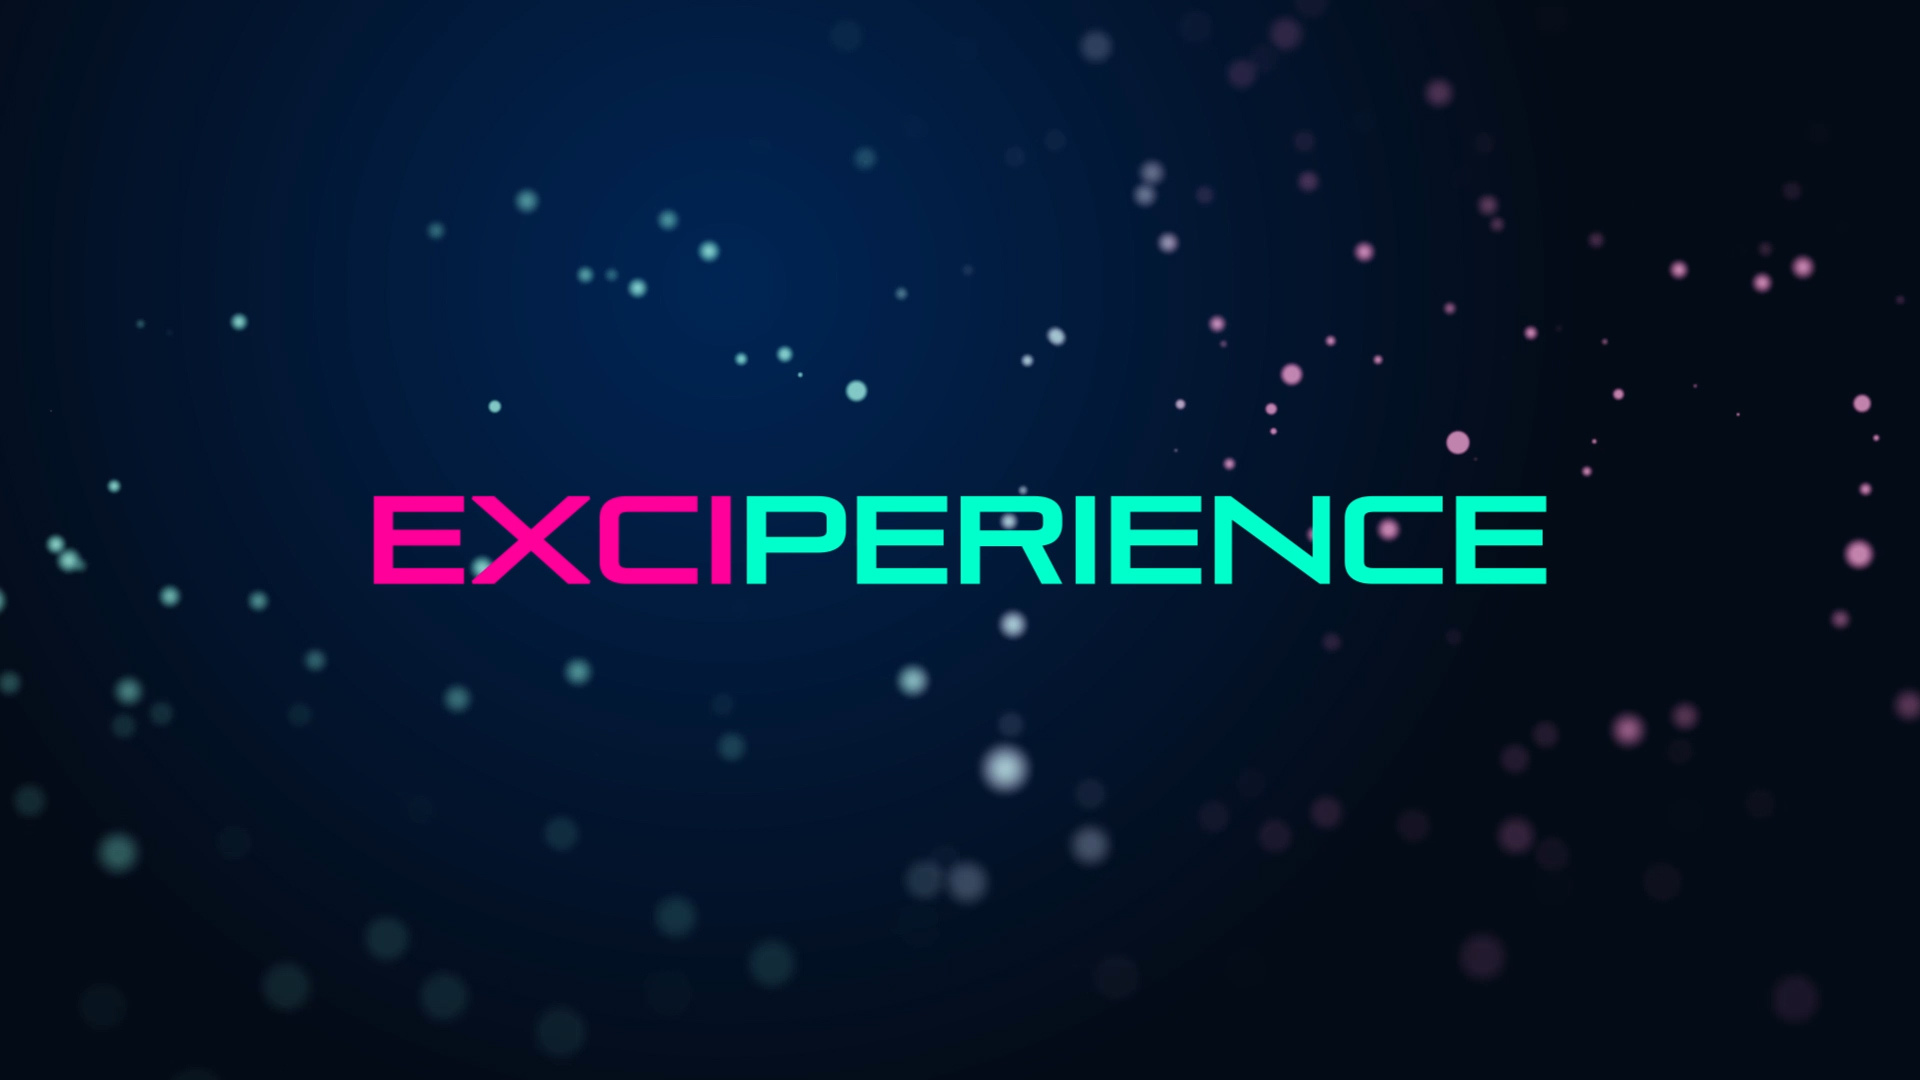 Exciperience universe